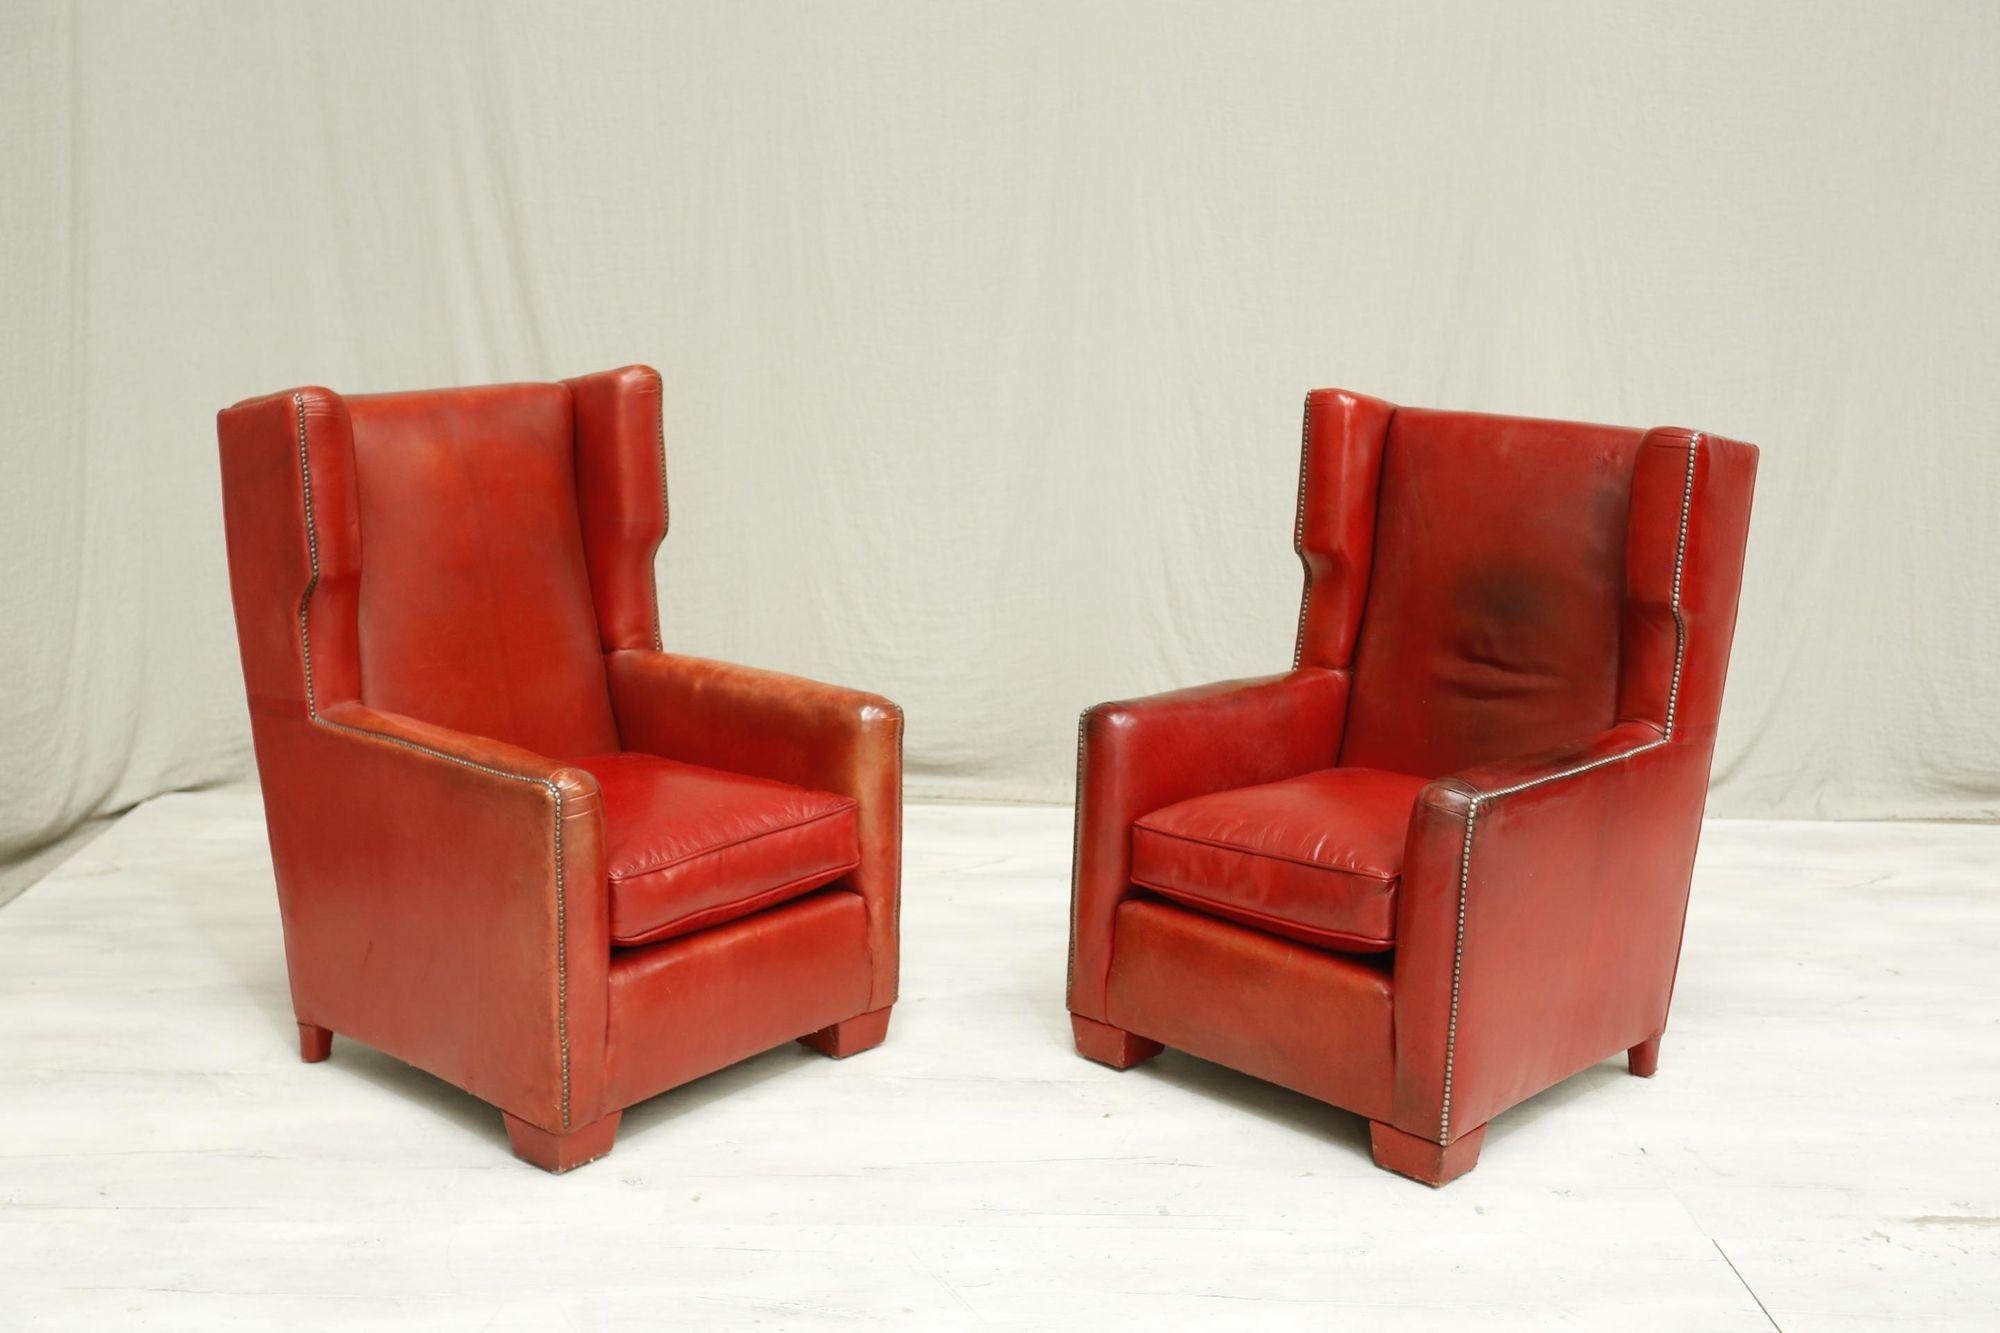 These are an exceptional pair of 1940's leather armchairs in the most incredible red colour. The patina is just right and the colour is rich making these hugely decorative items. As well as very comfy everyday chairs. The backs are crushed velvet